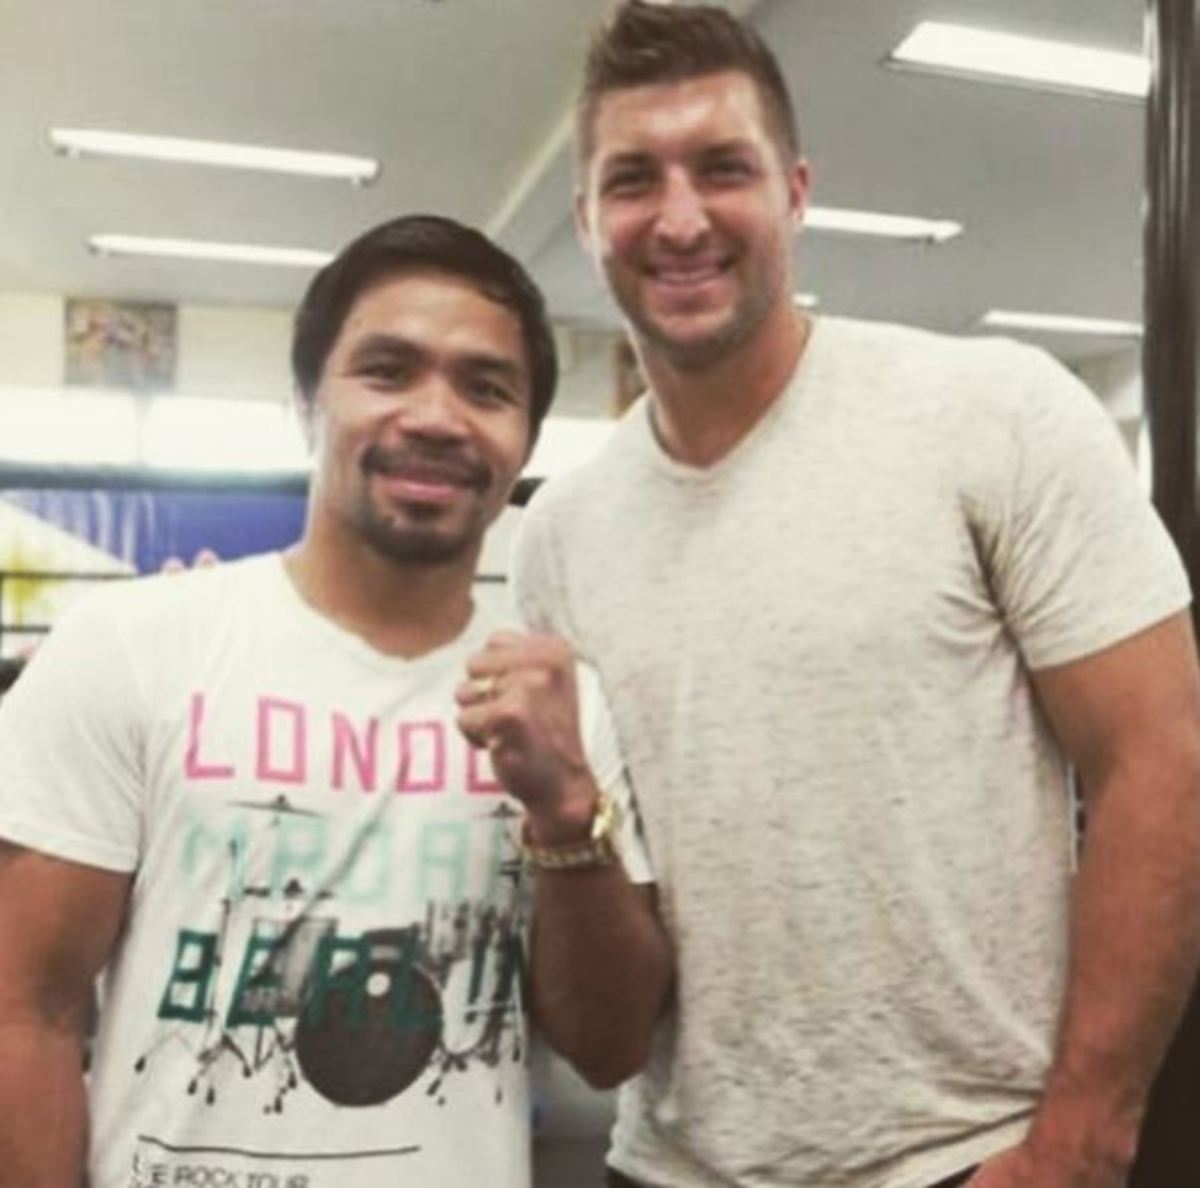 Tim Tebow and Manny Pacquiao pose for picture.